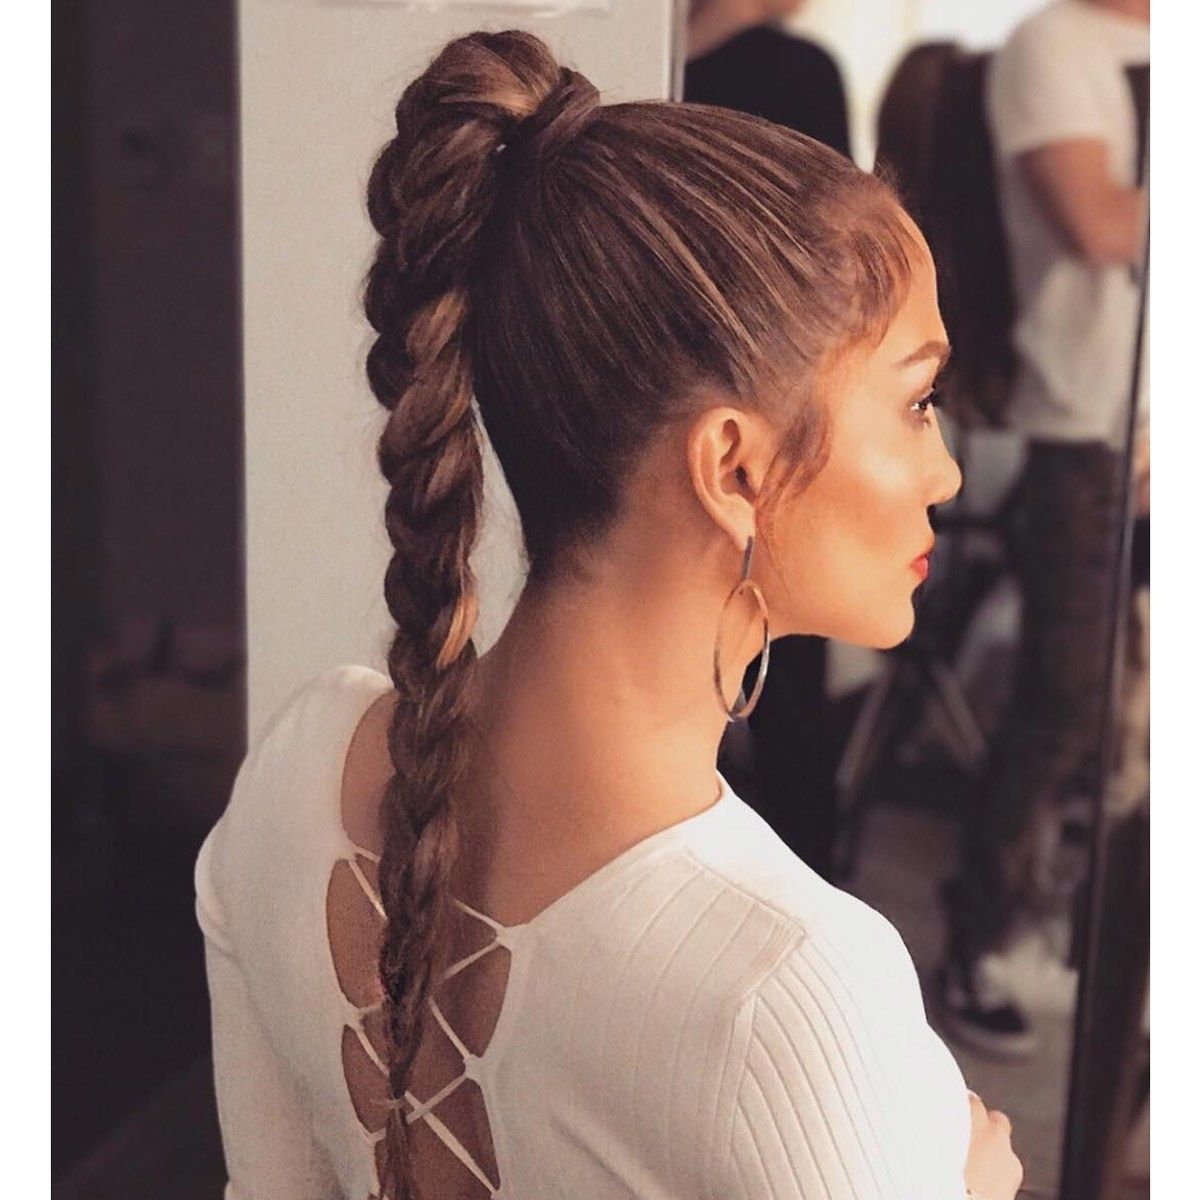 27 Ponytail Hairstyles For 2018: Best Ponytail Styles (View 18 of 20)